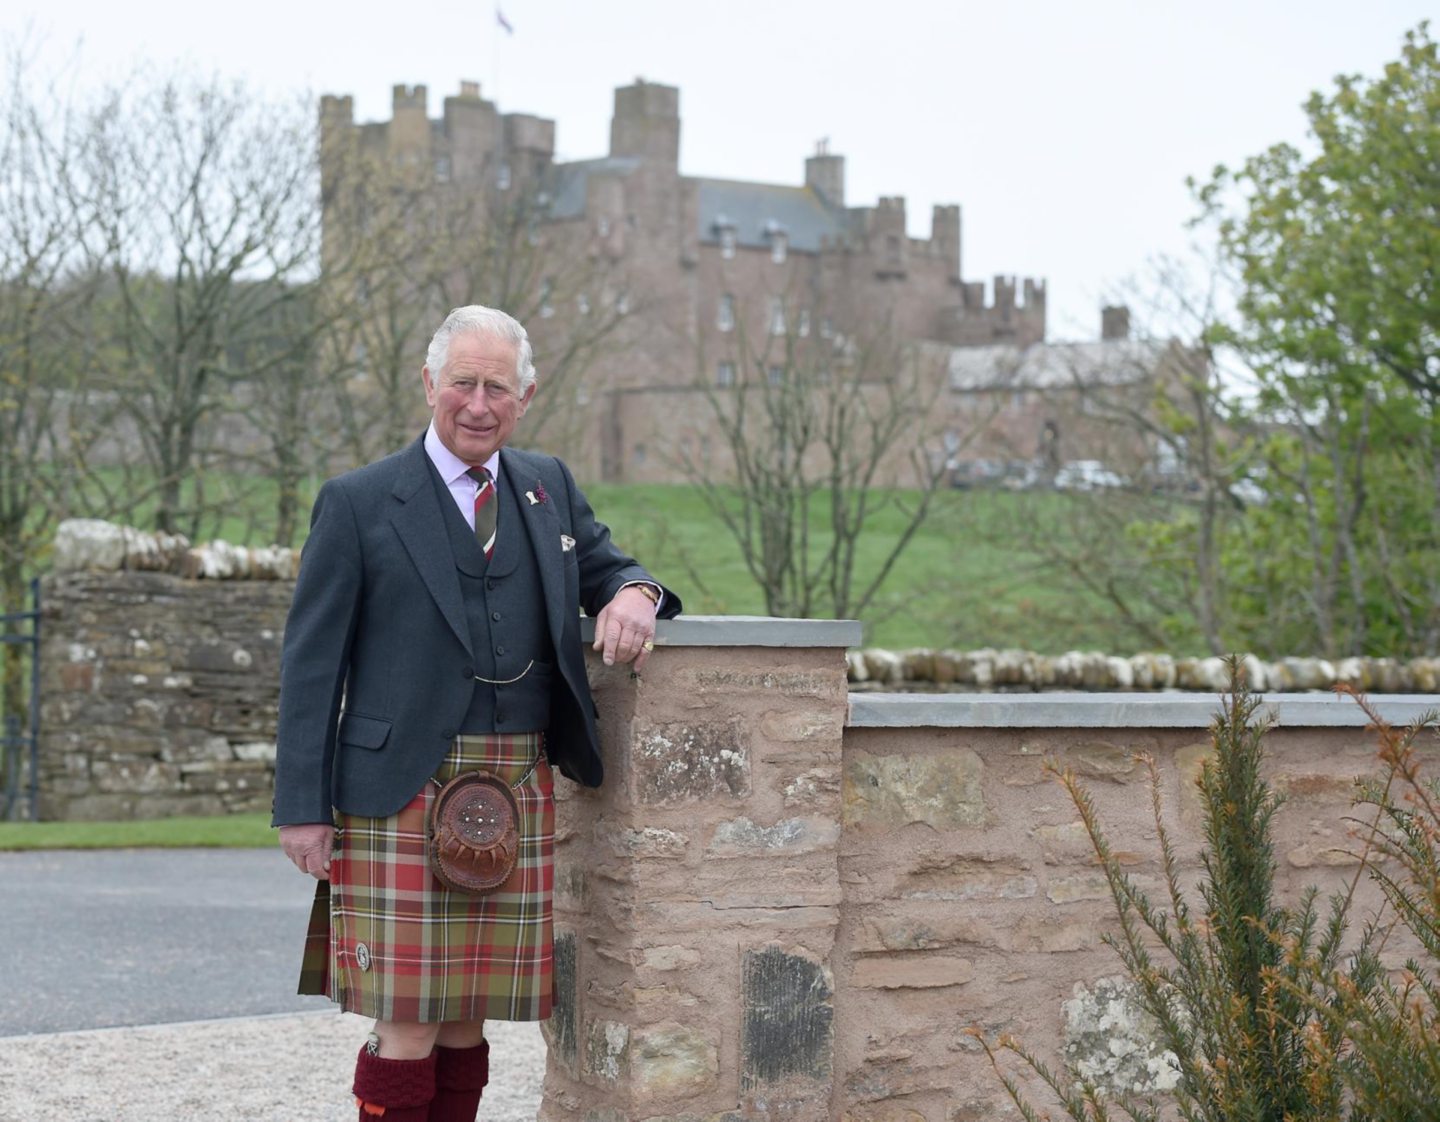 Prince Charles has spent the week at Castle of Mey prior to his appearance at the Mey Highland Games today in John O'Groats